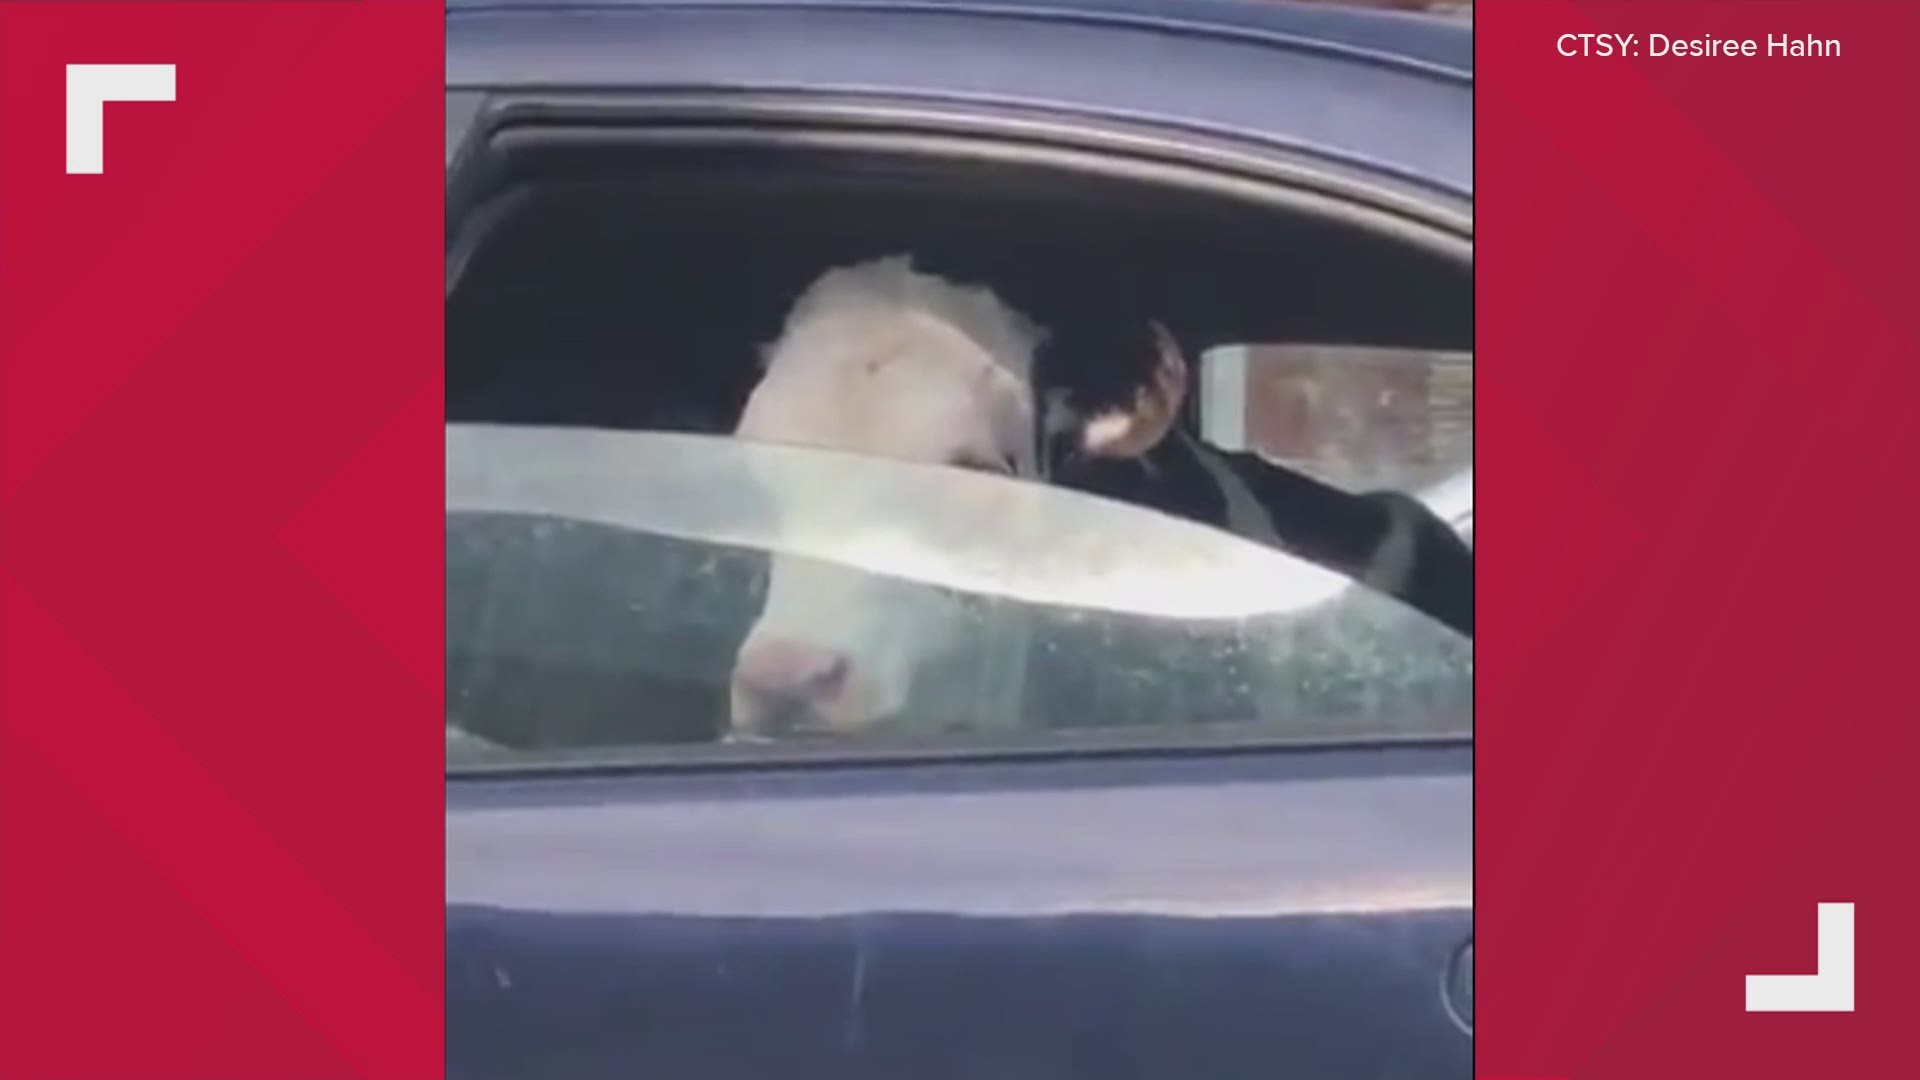 Sometimes in Maine you happen to see a cow hanging out in the back of a car.